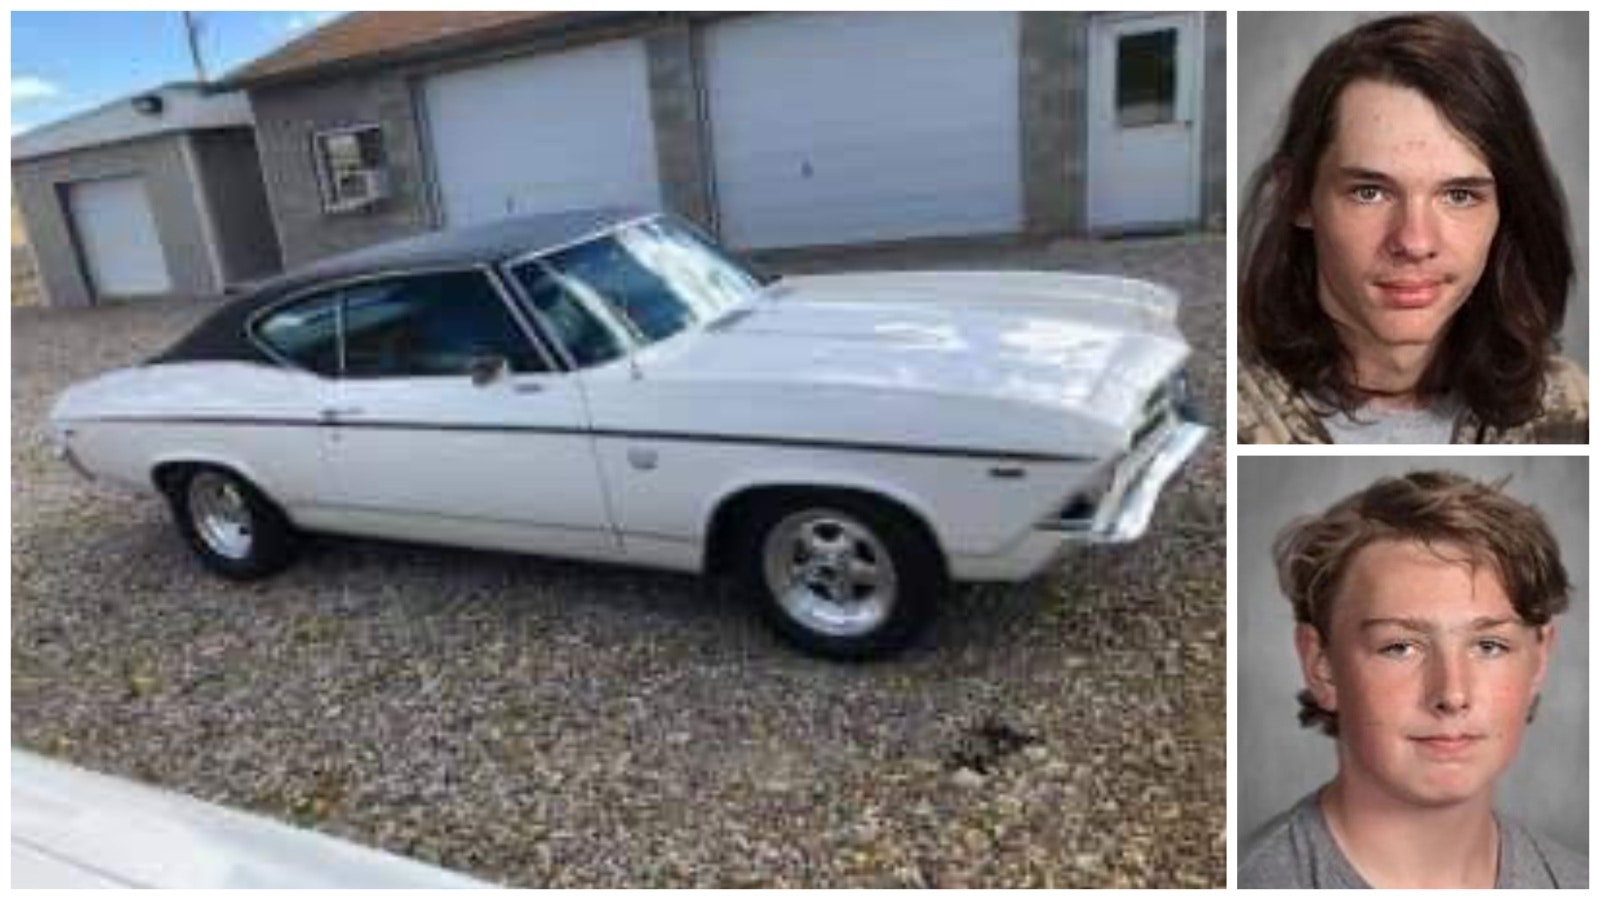 Otis Edlund, top right, and Quintin Wyrick Amarillo, both 16 and from Lander, Wyoming, are suspected of stealing this 1969 Chevy Chevelle.